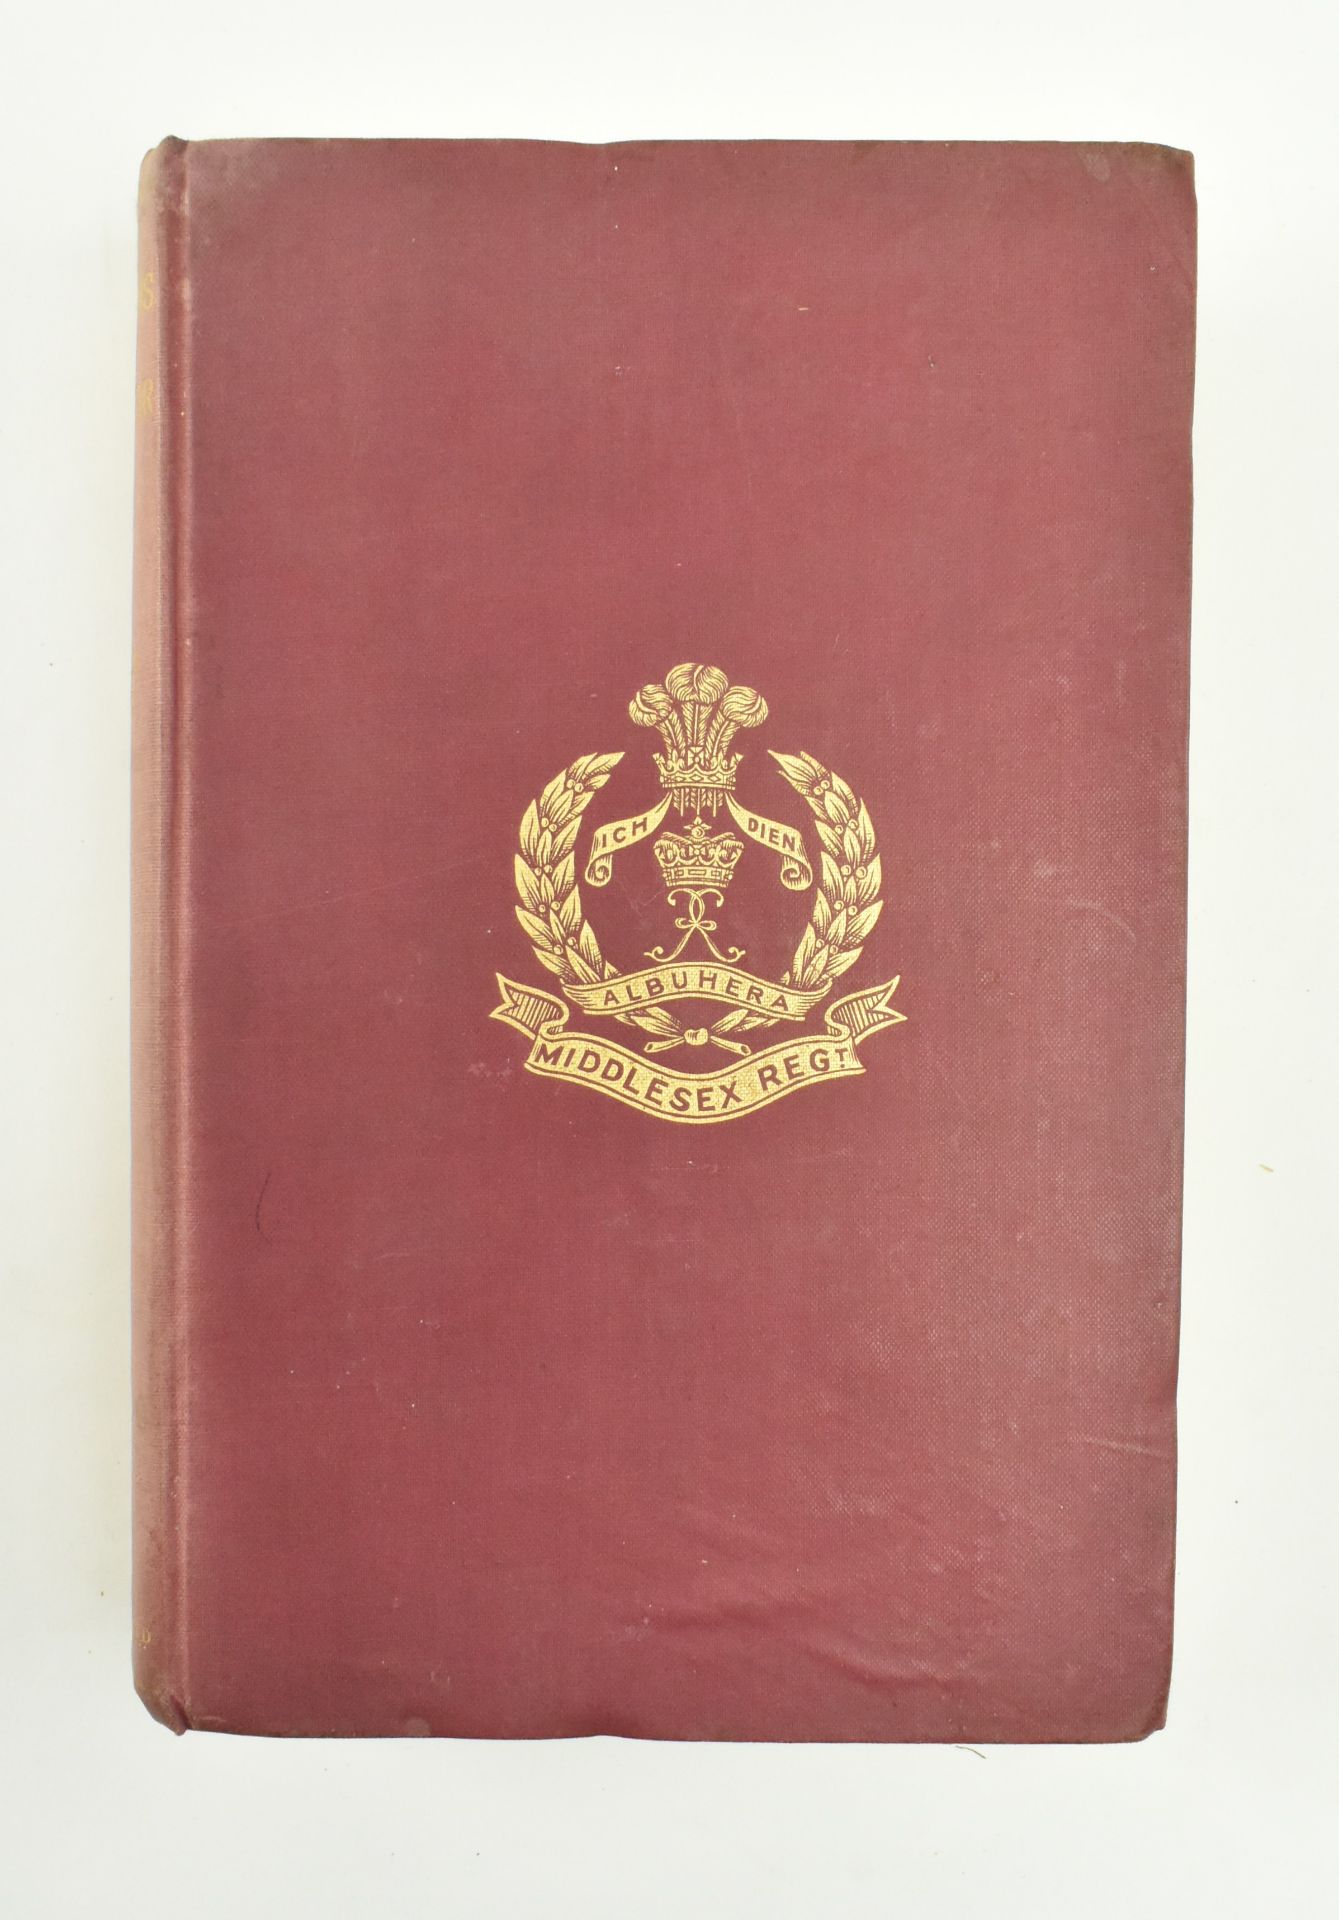 MILITARY & WW1 INTEREST. COLLECTION OF CLOTHBOUND BOOKS - Image 5 of 10